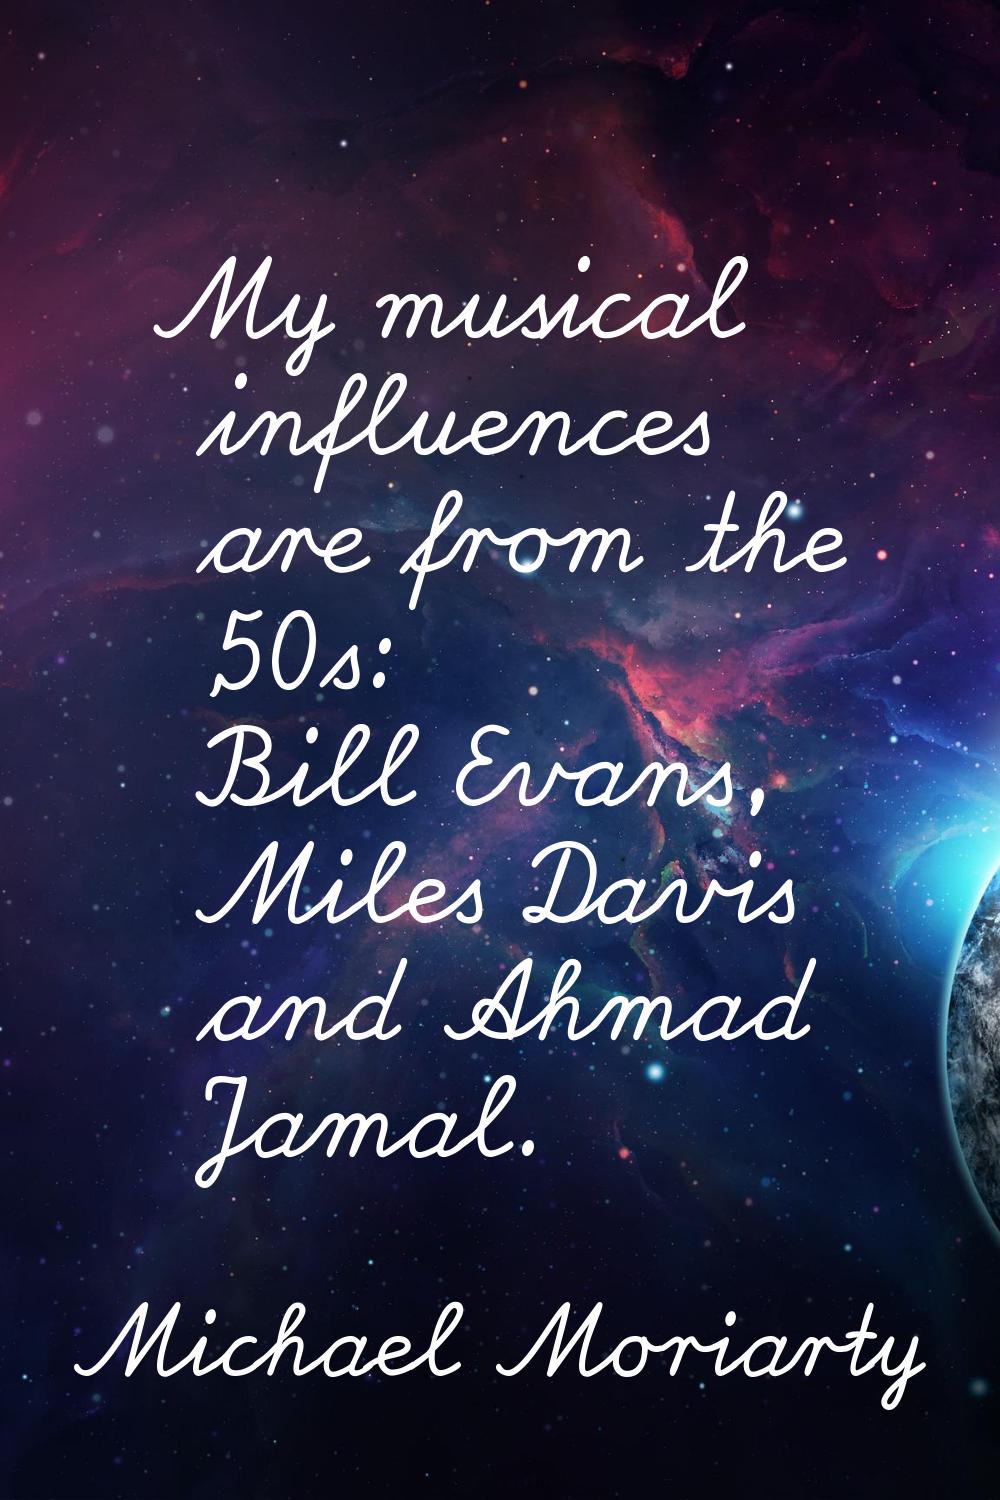 My musical influences are from the '50s: Bill Evans, Miles Davis and Ahmad Jamal.